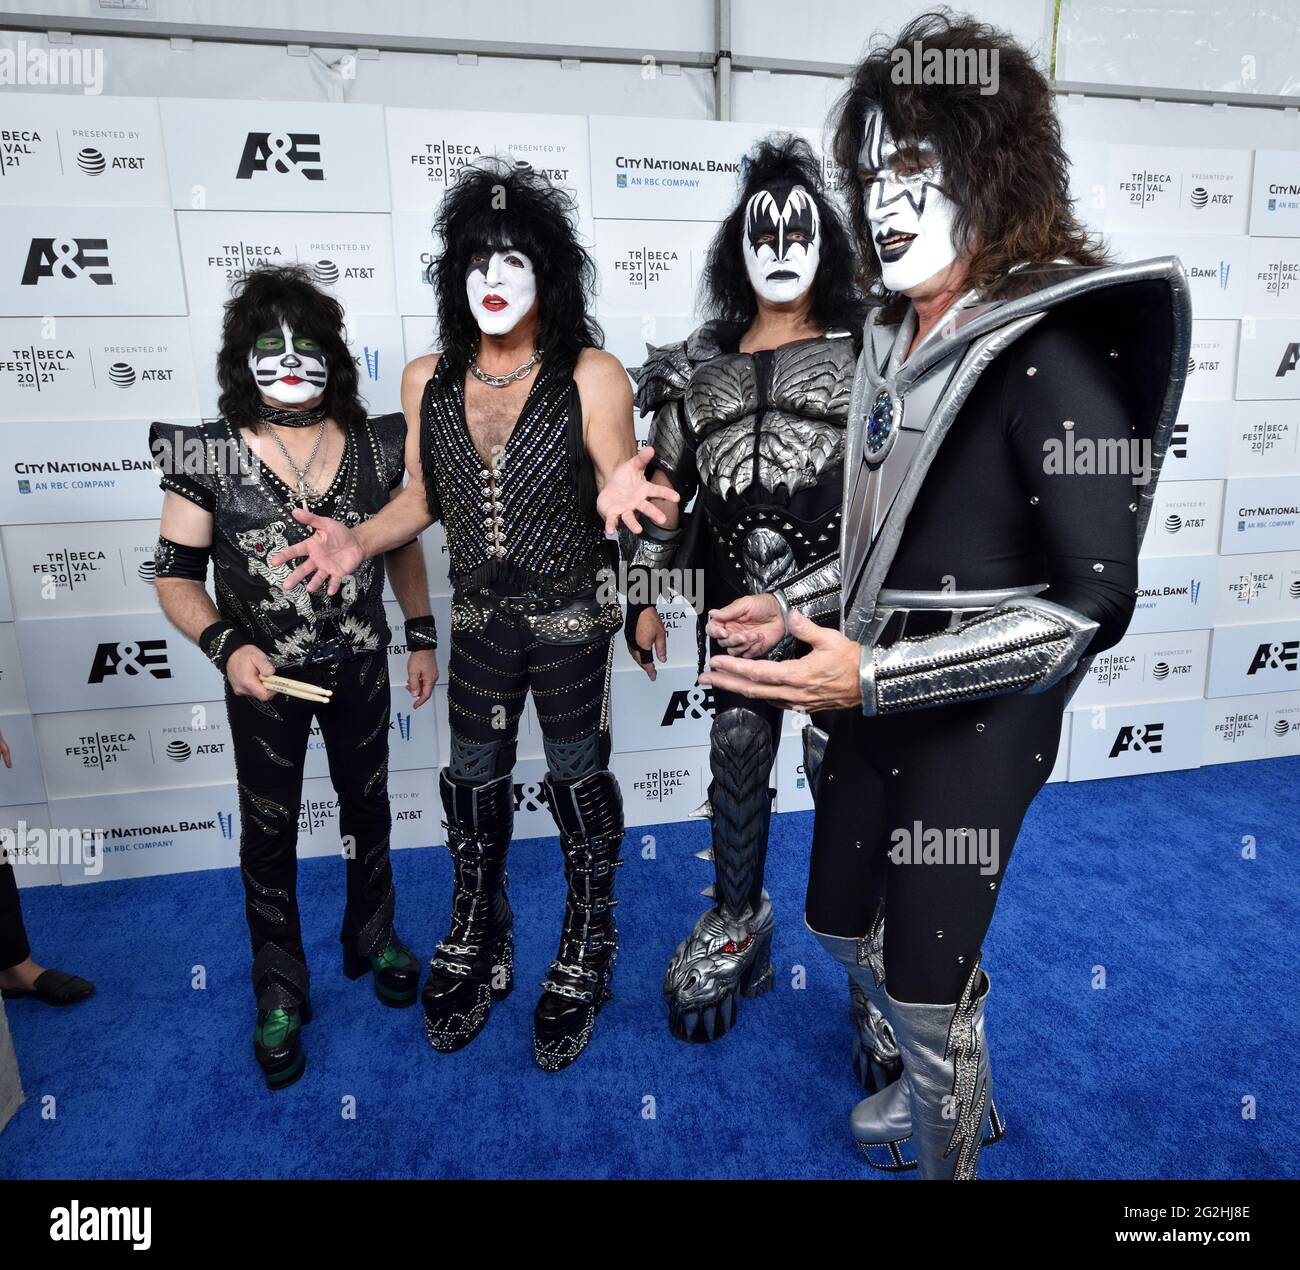 New York, USA. 11th June, 2021. L-R: KISS musicians Eric Singer, Paul  Stanley, Gene Simmons and Tommy Thayer attend the premiere of  Biography:KISStory at the Tribeca Festival 2021 at The Battery in